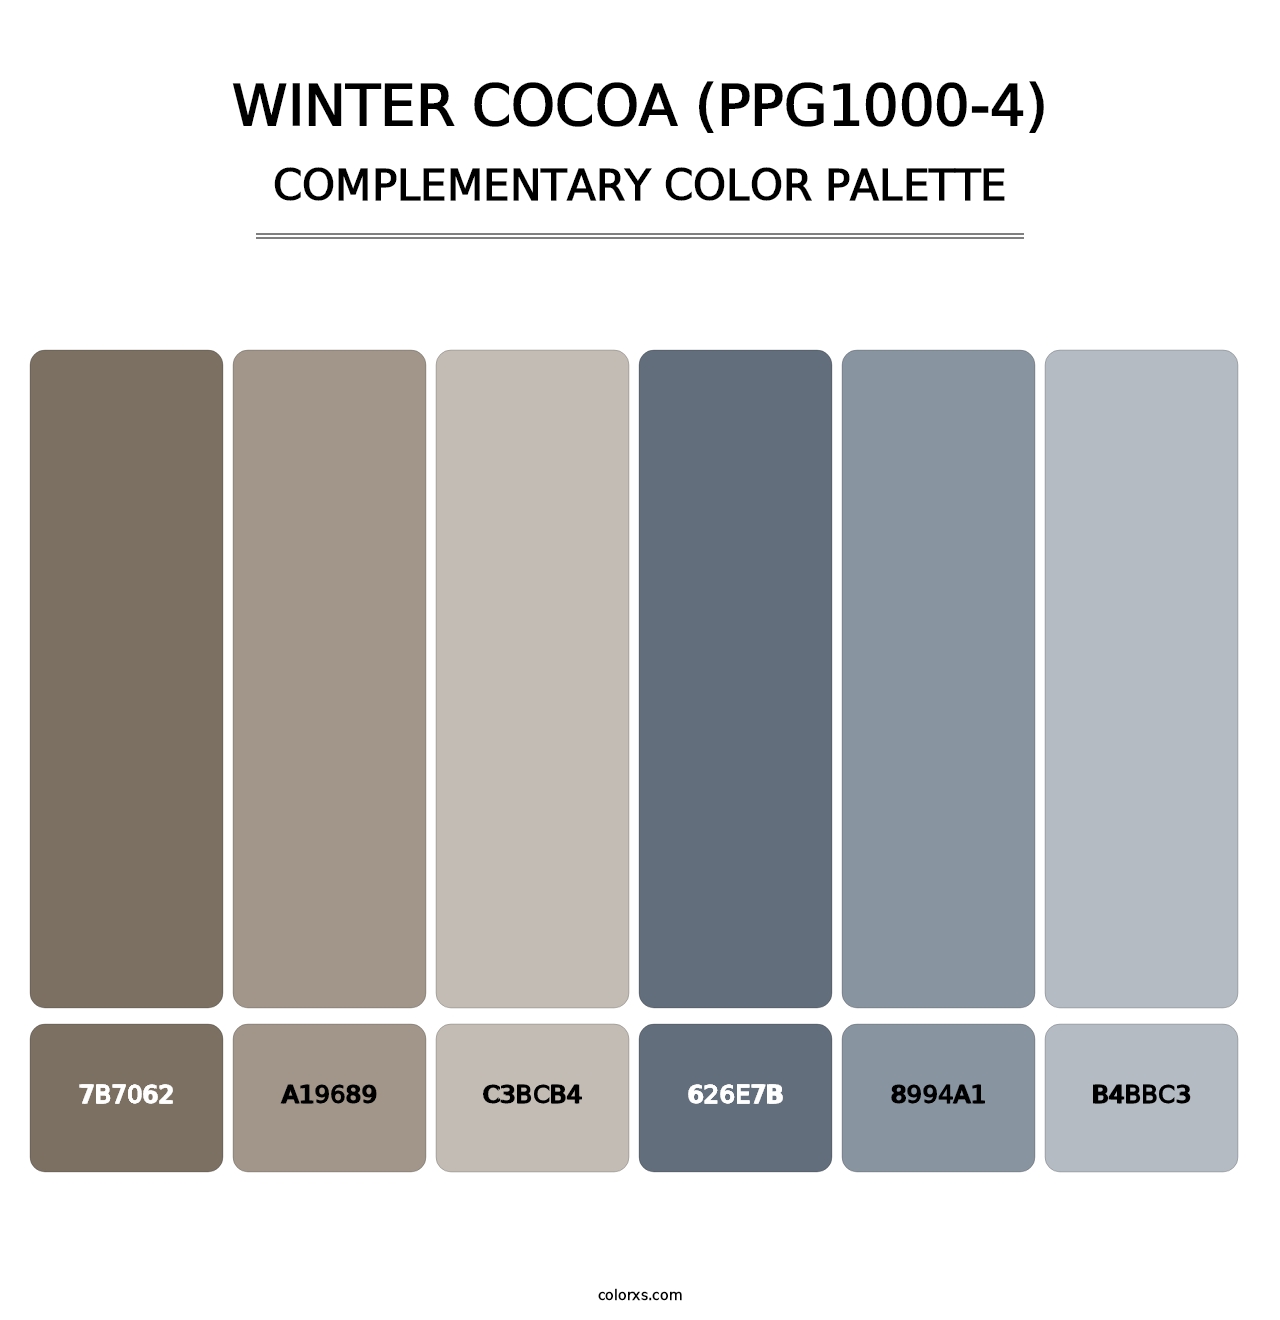 Winter Cocoa (PPG1000-4) - Complementary Color Palette